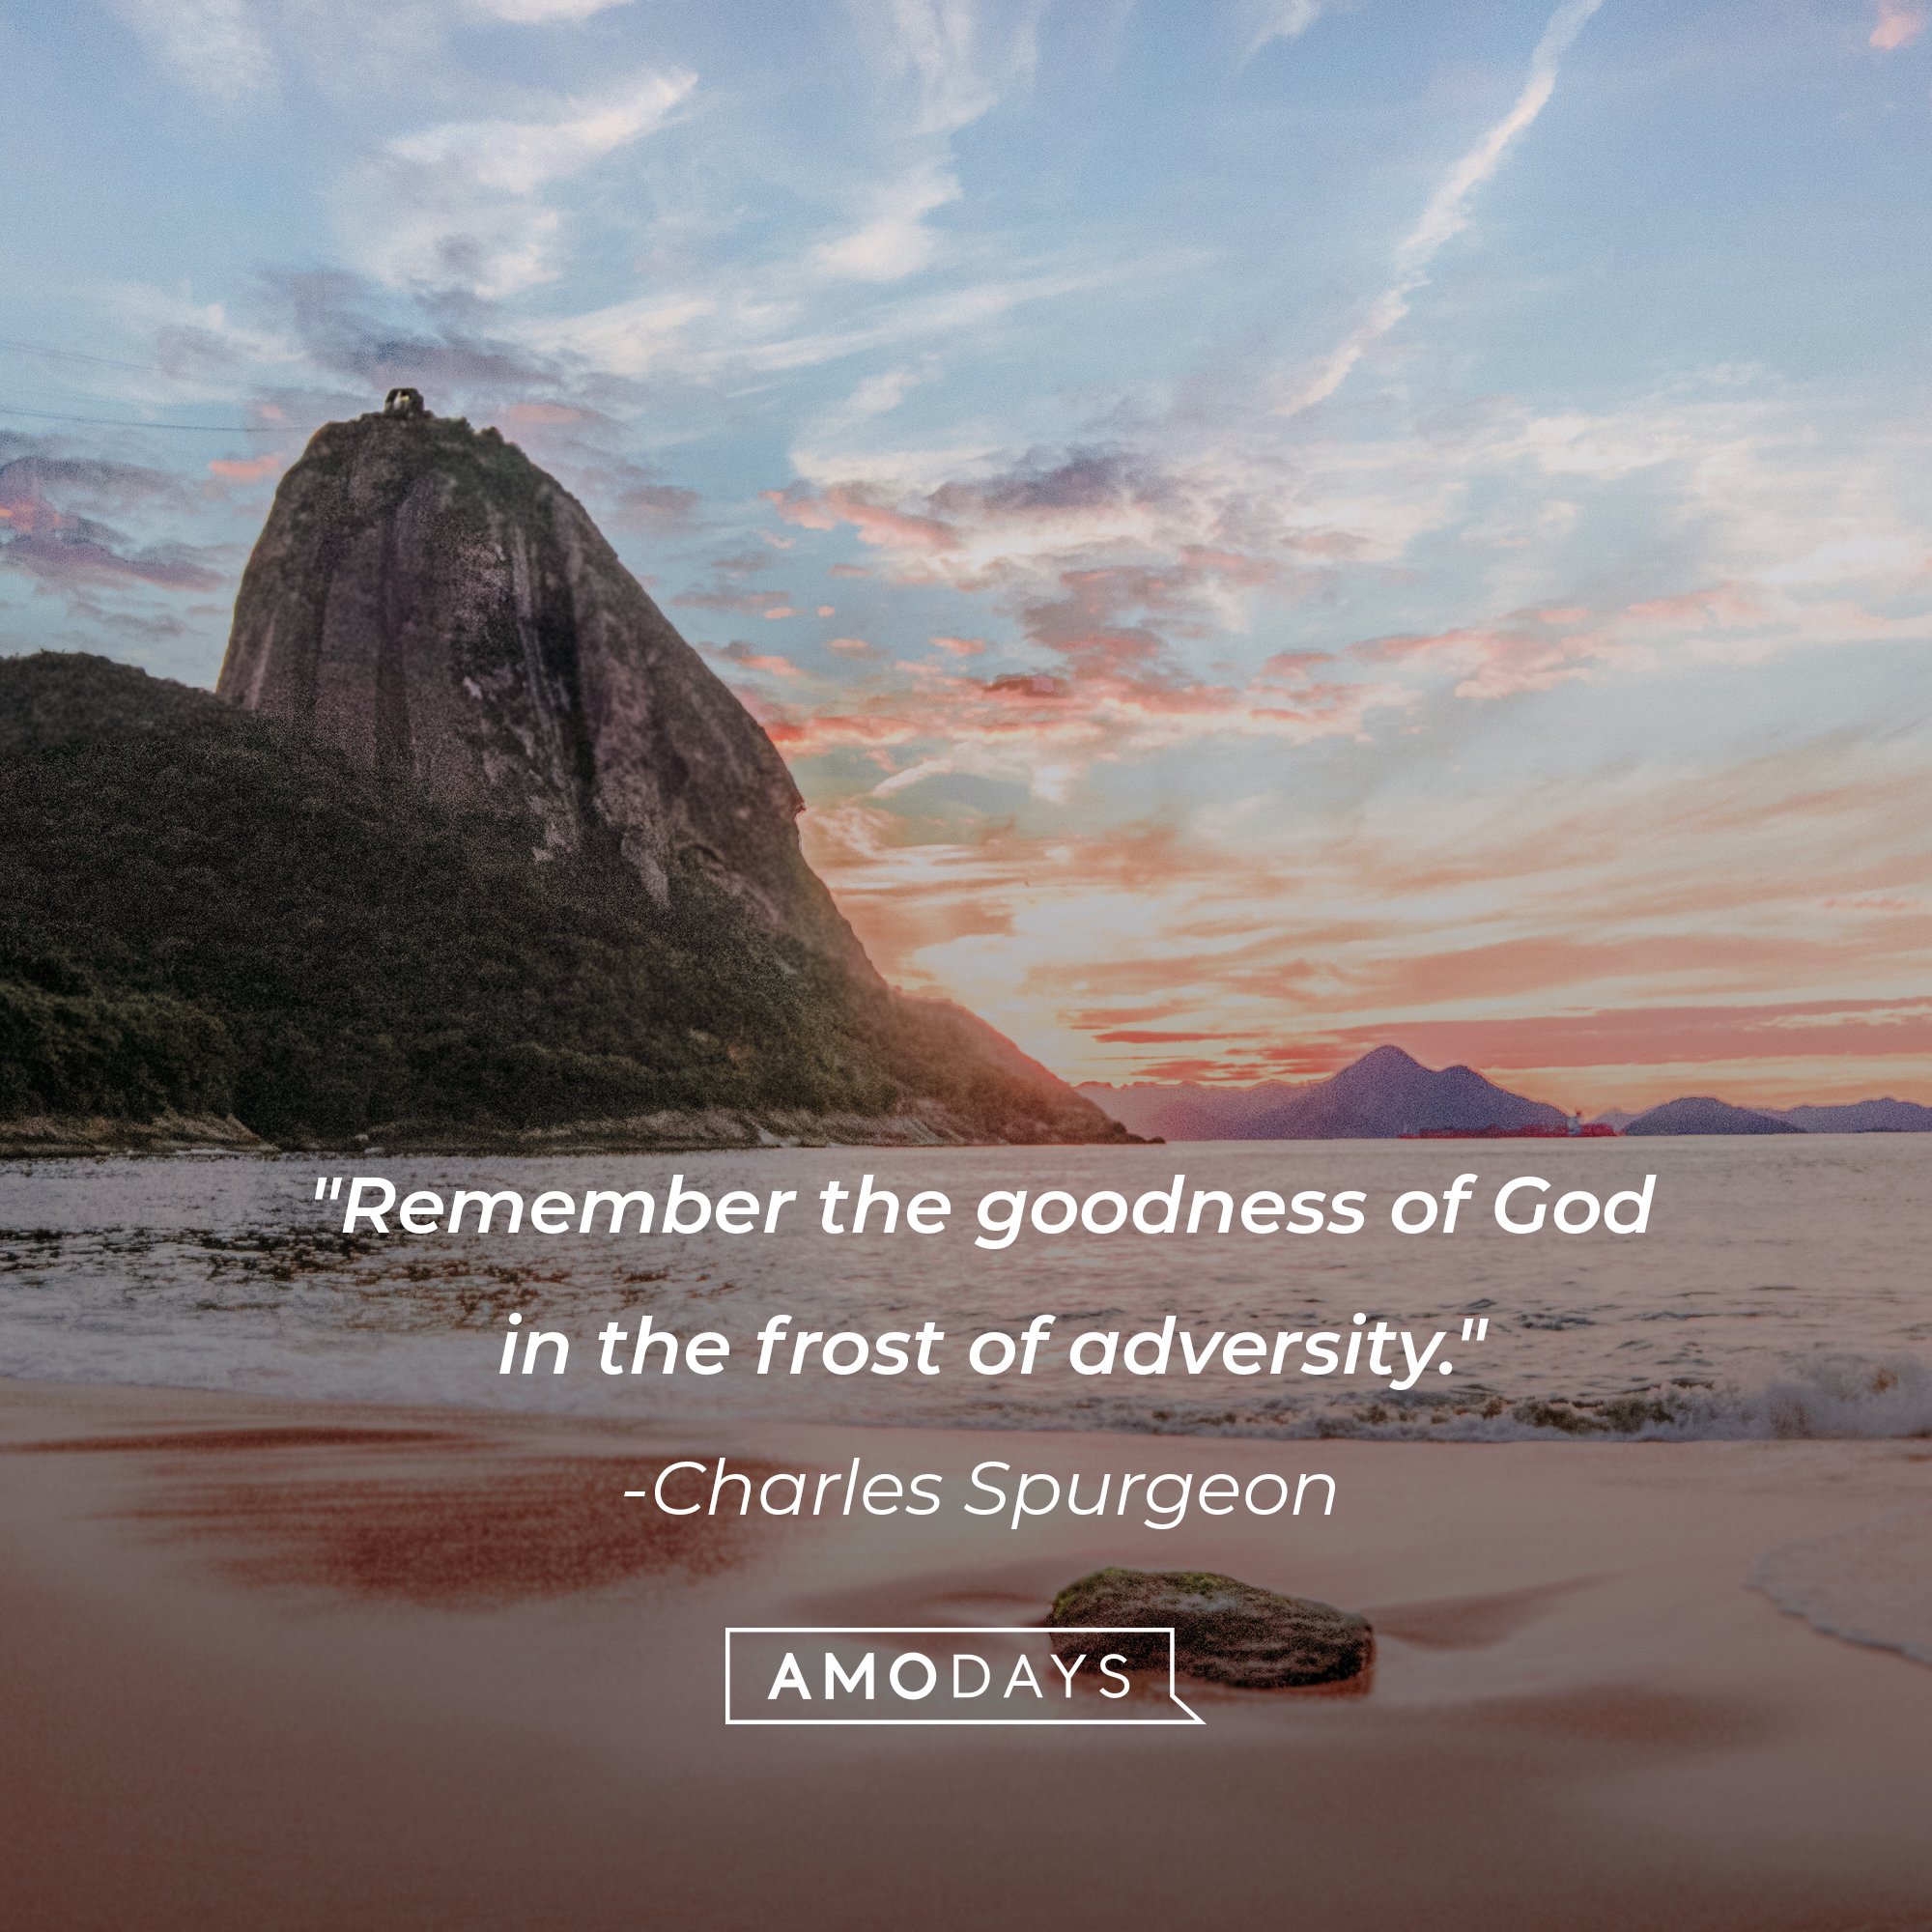 Charles Spurgeon’s quote: "Remember the goodness of God in the frost of adversity." | Image: AmoDays